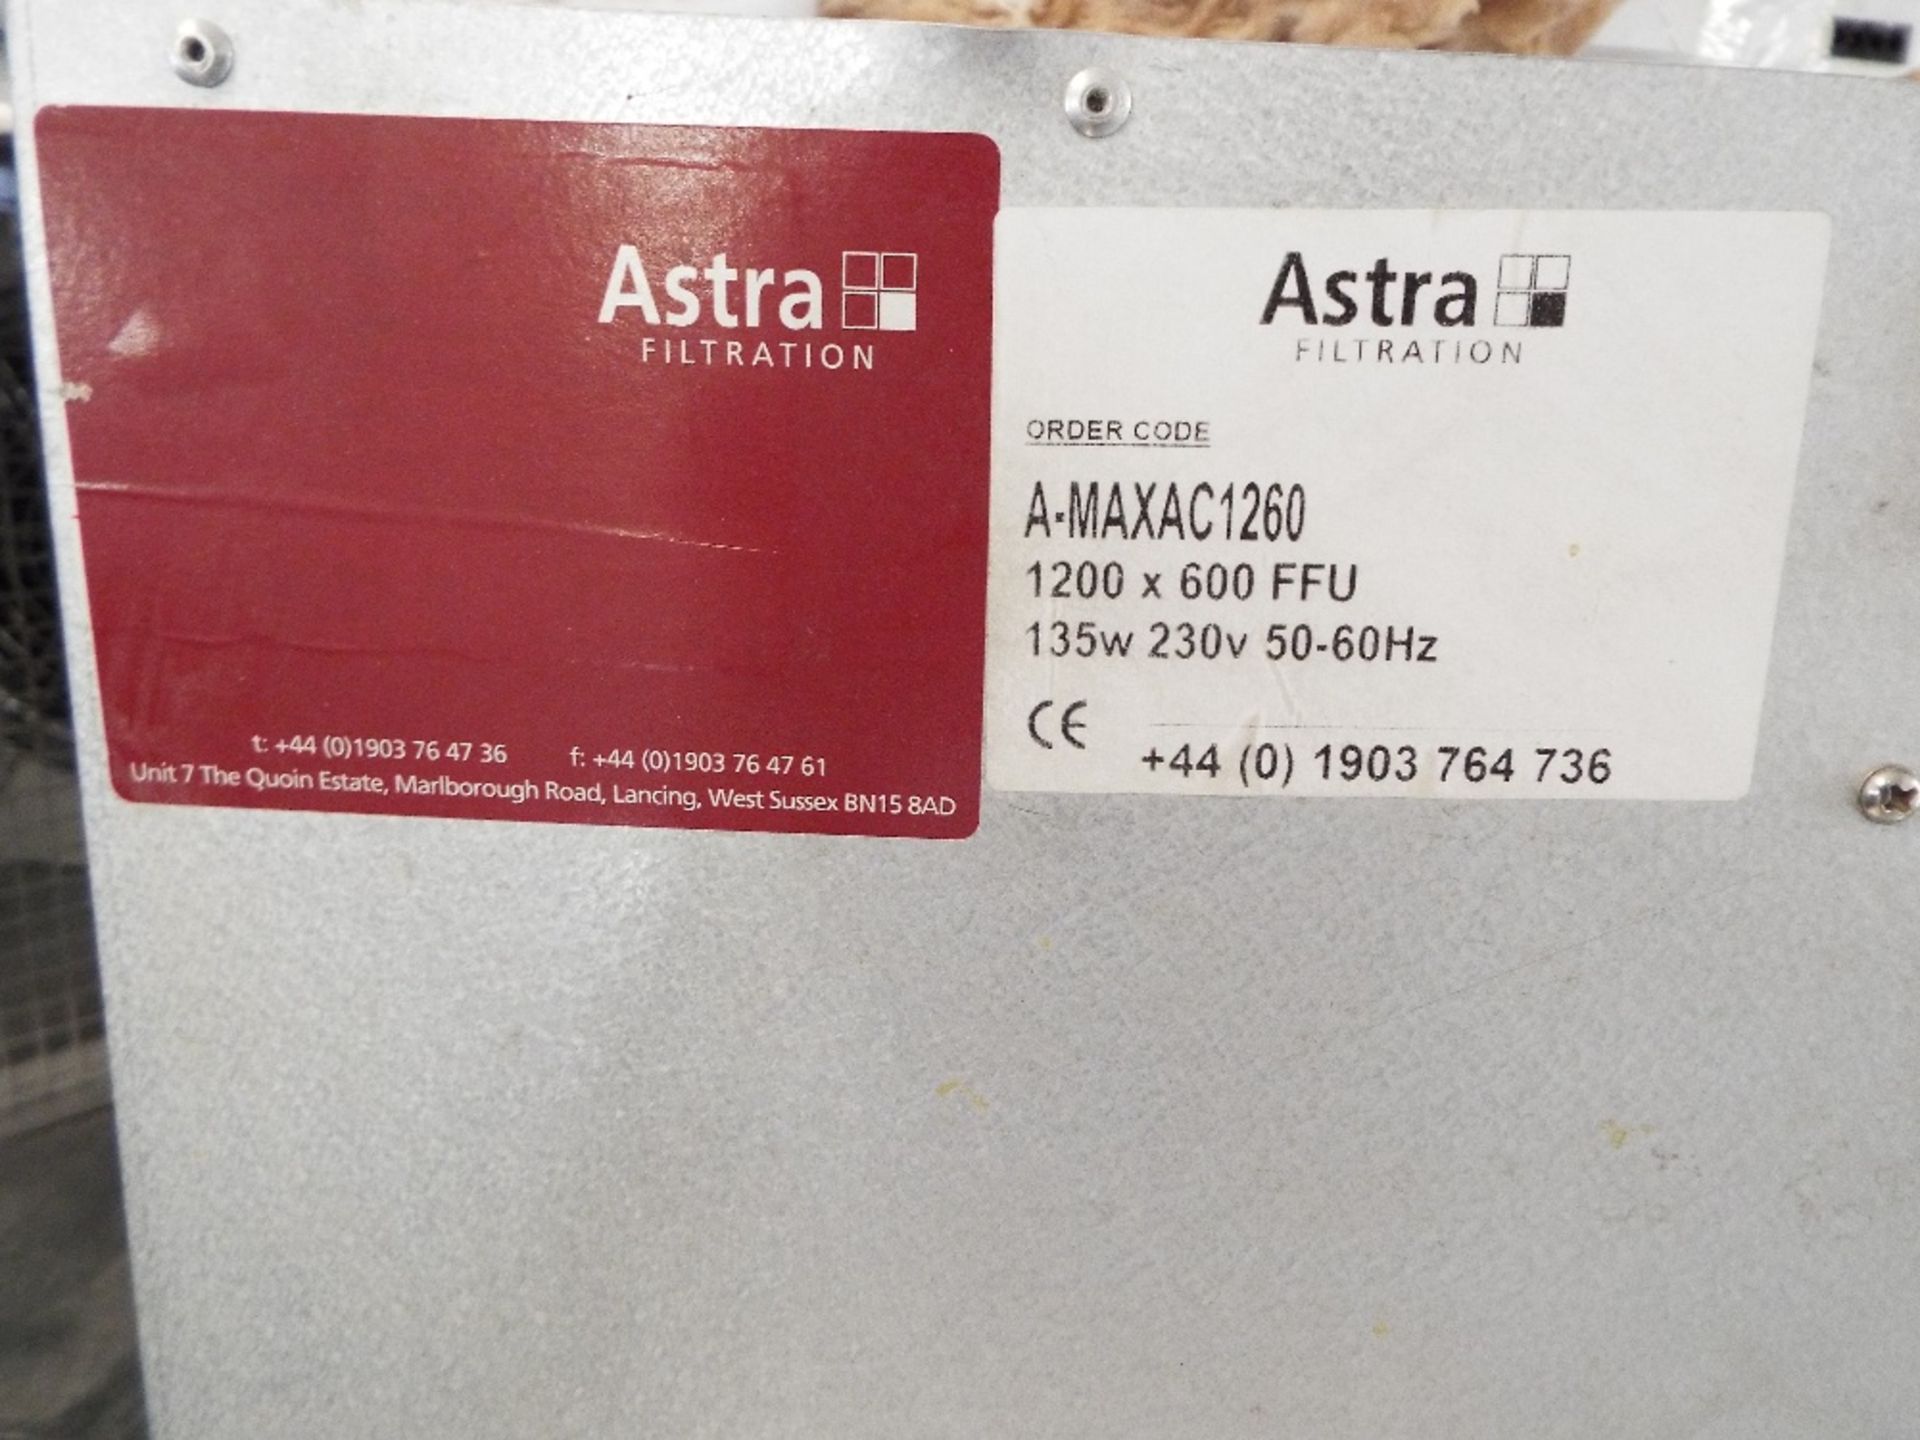 Astra Filtration Air Handling Unit - Image 2 of 2